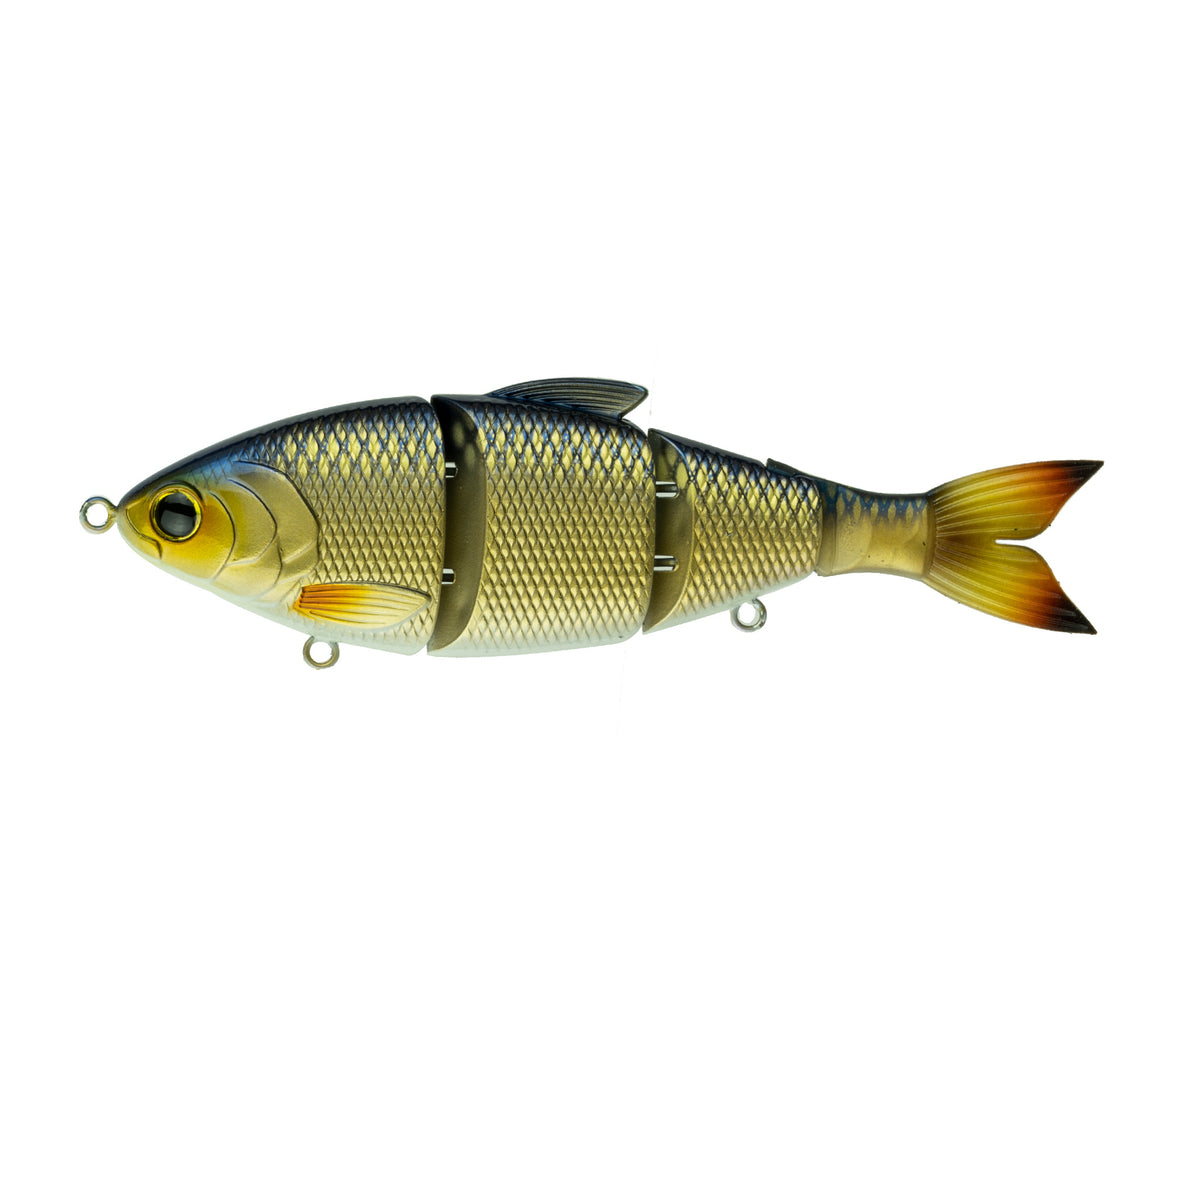 Mountain View Adventures LLC - We have live bait shiners, spikes